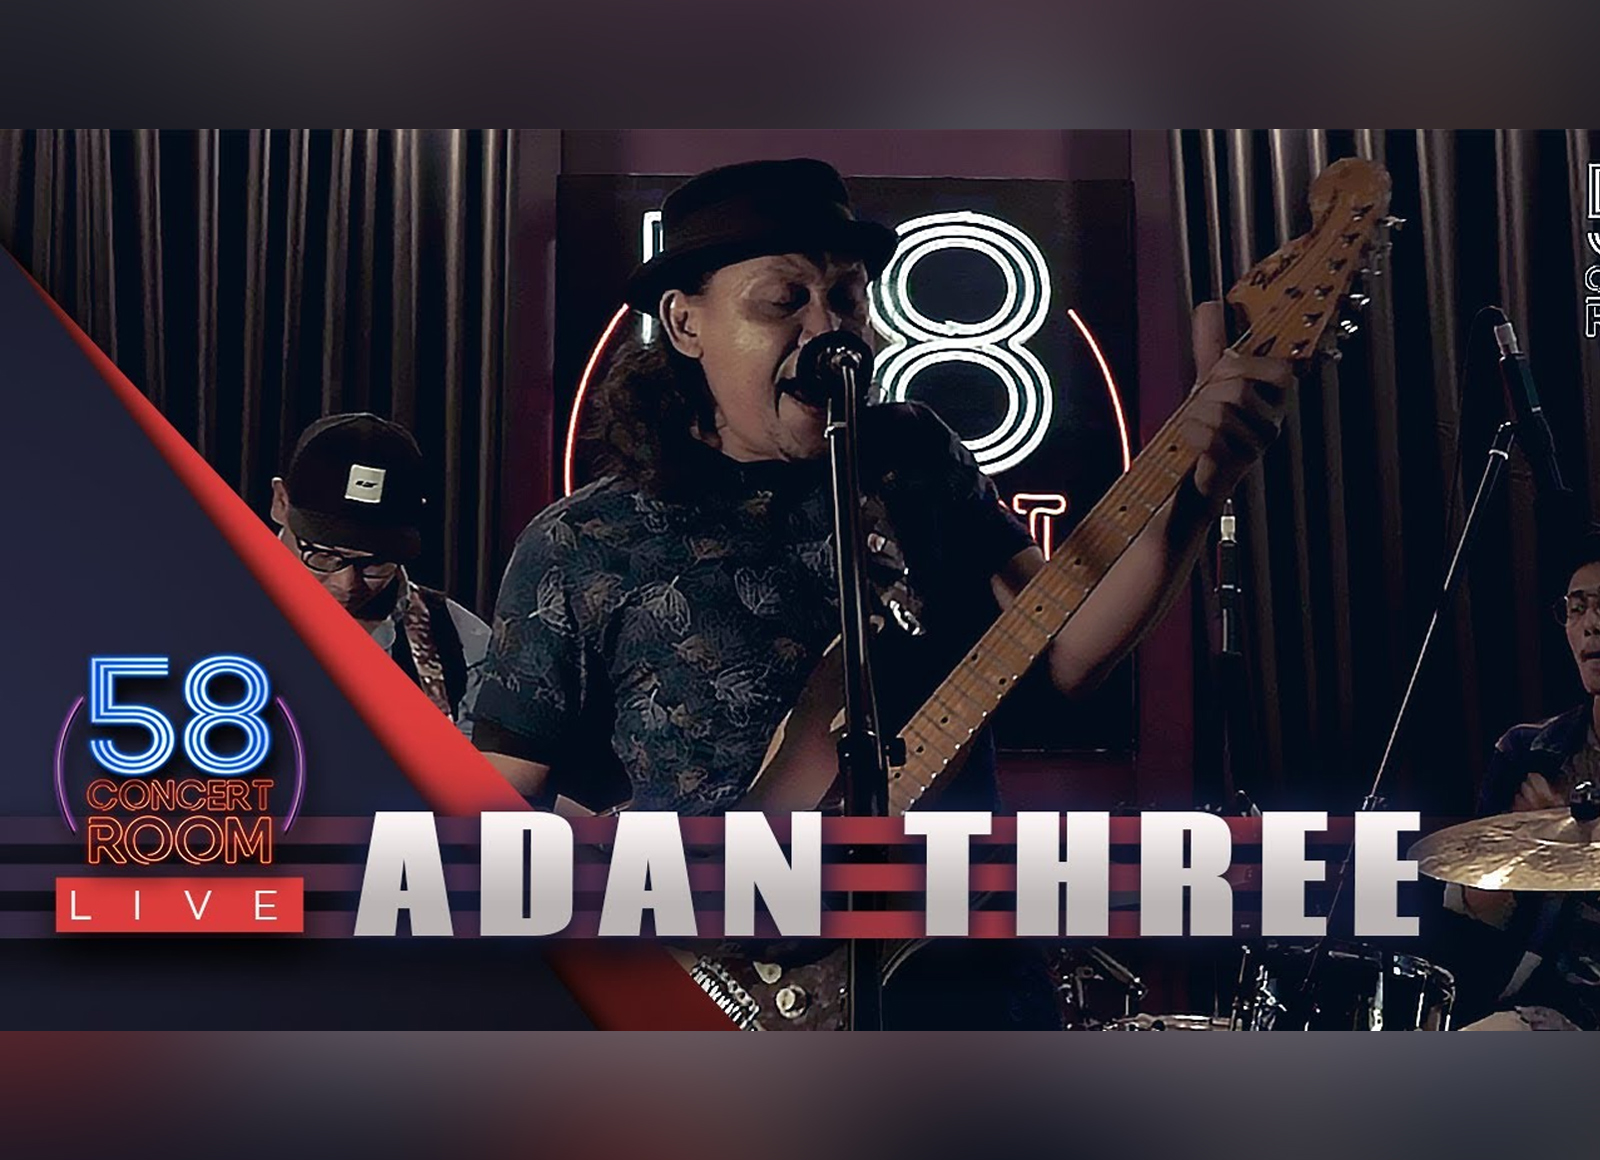 Blues Rock & Roll Band, Adanthree Live at 58 Concert Room